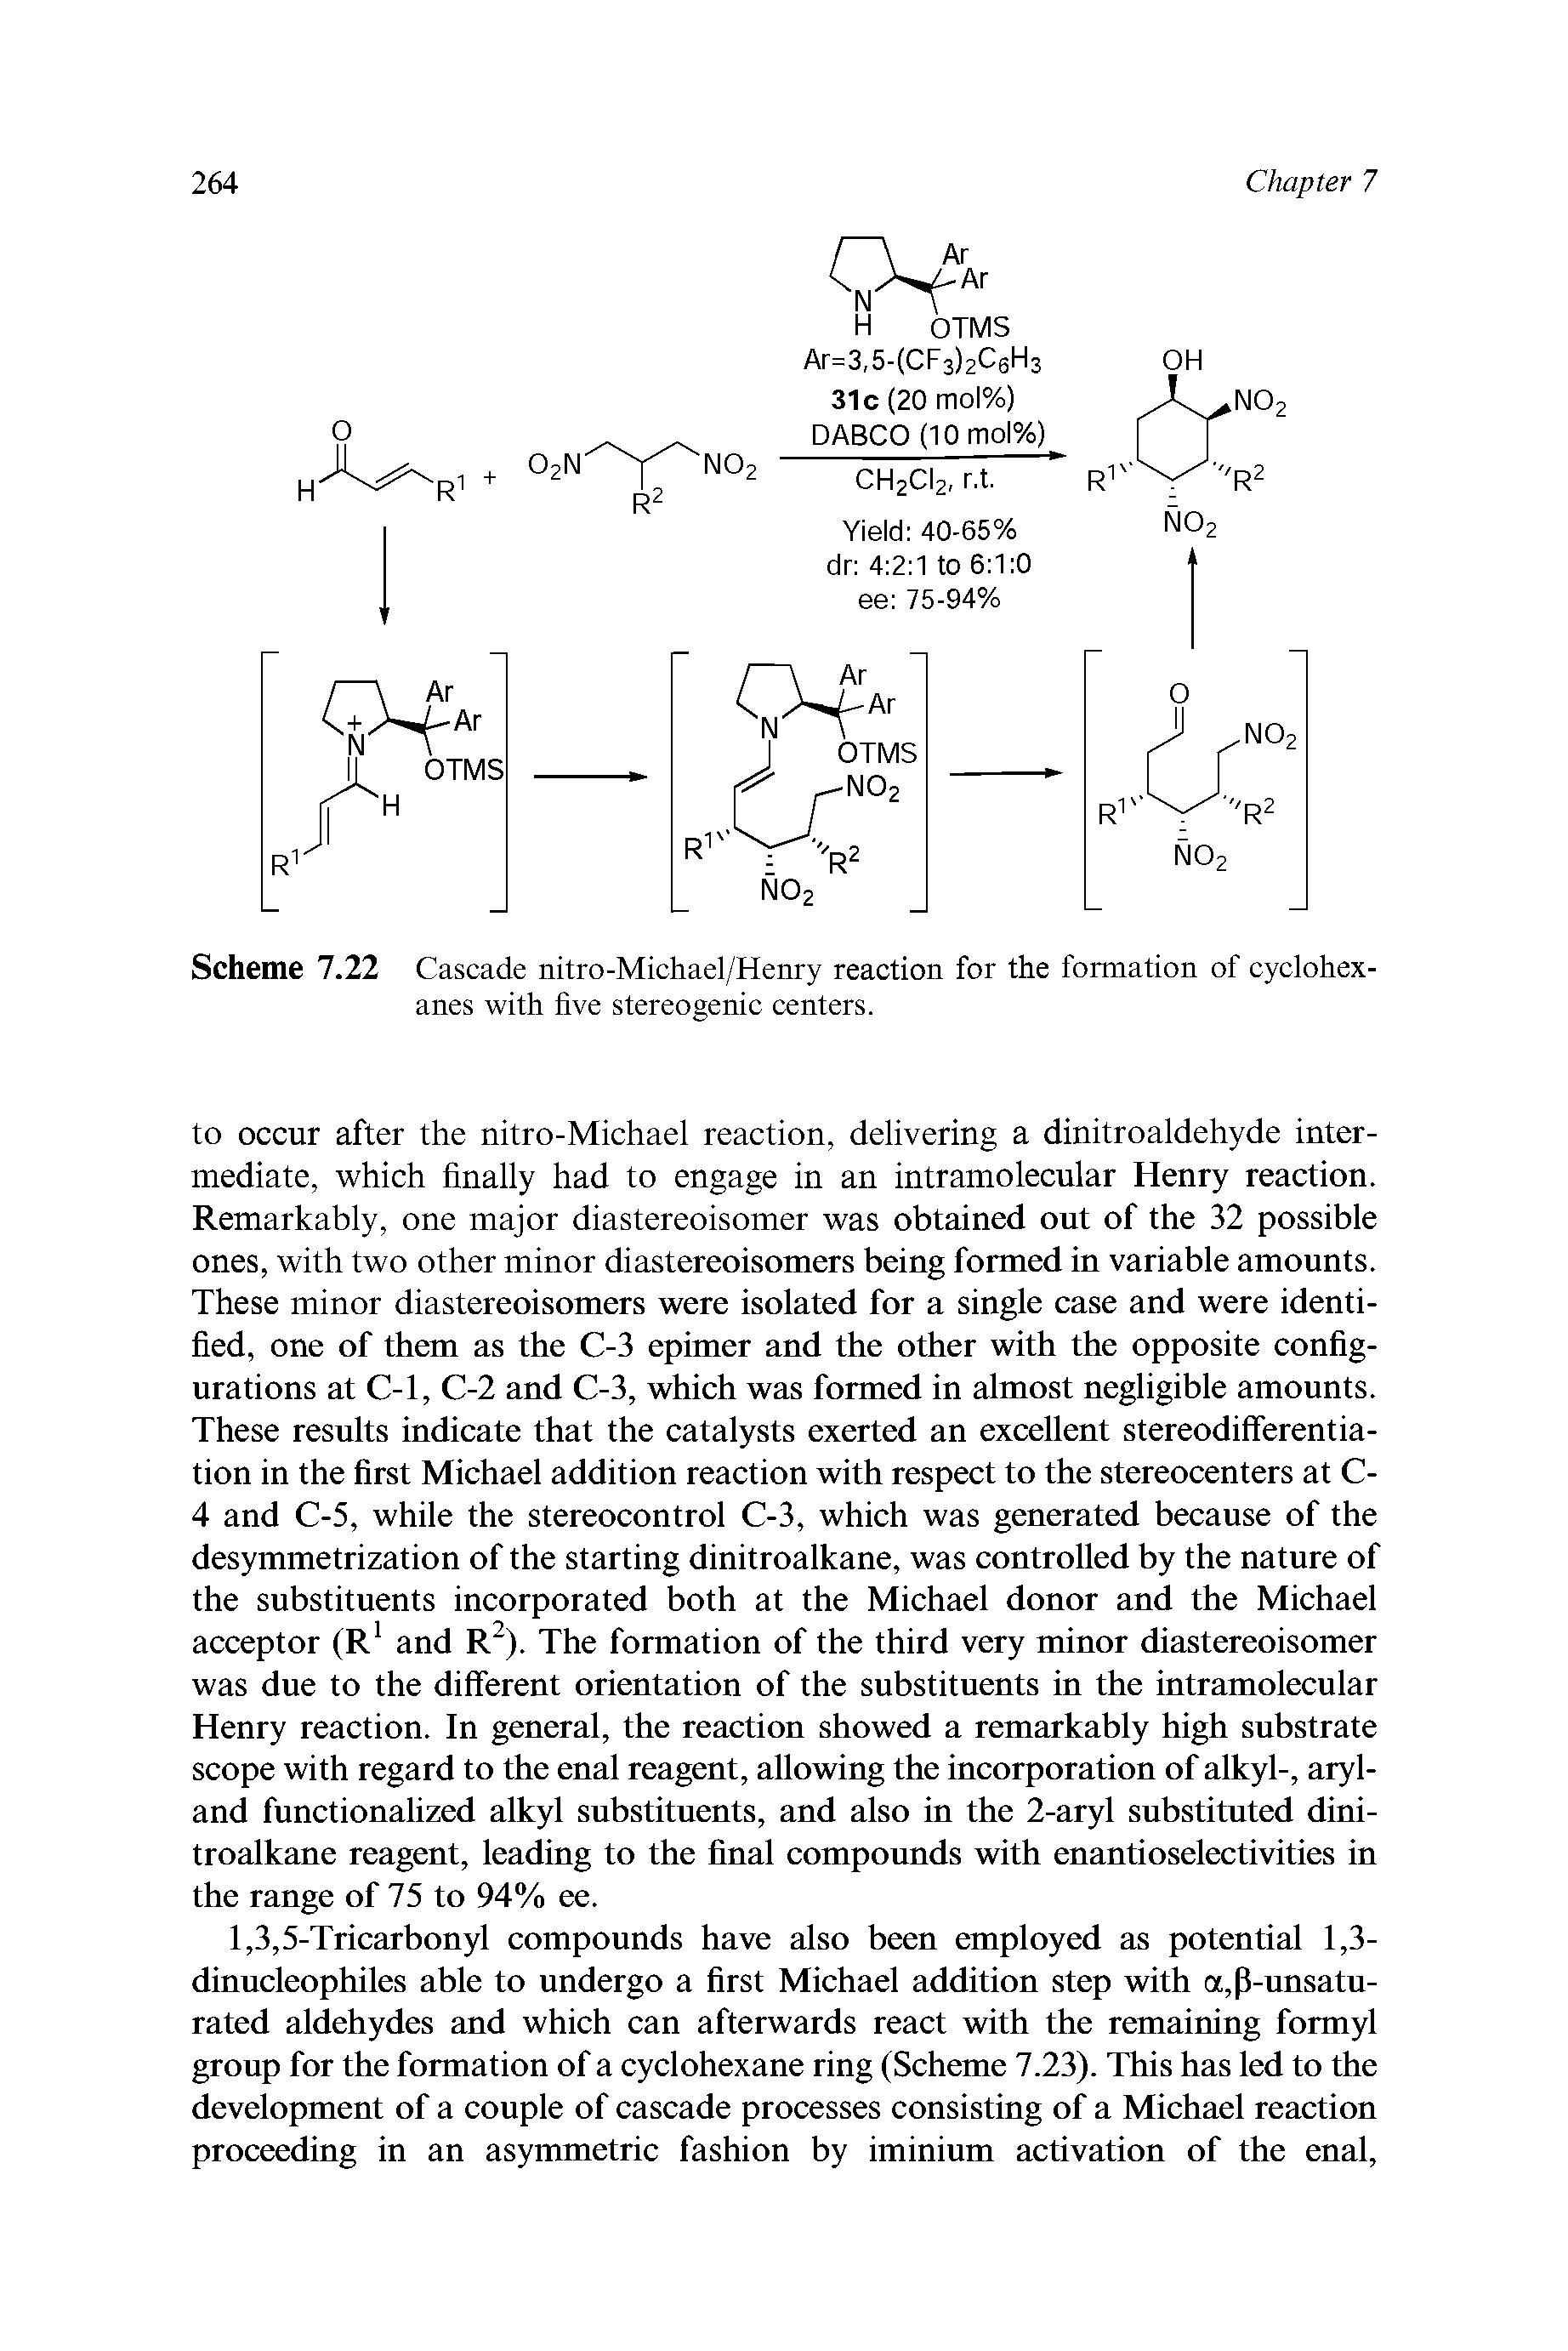 Scheme 7.22 Cascade nitro-Michael/Henry reaction for the formation of cyclohexanes with five stereogenic centers.